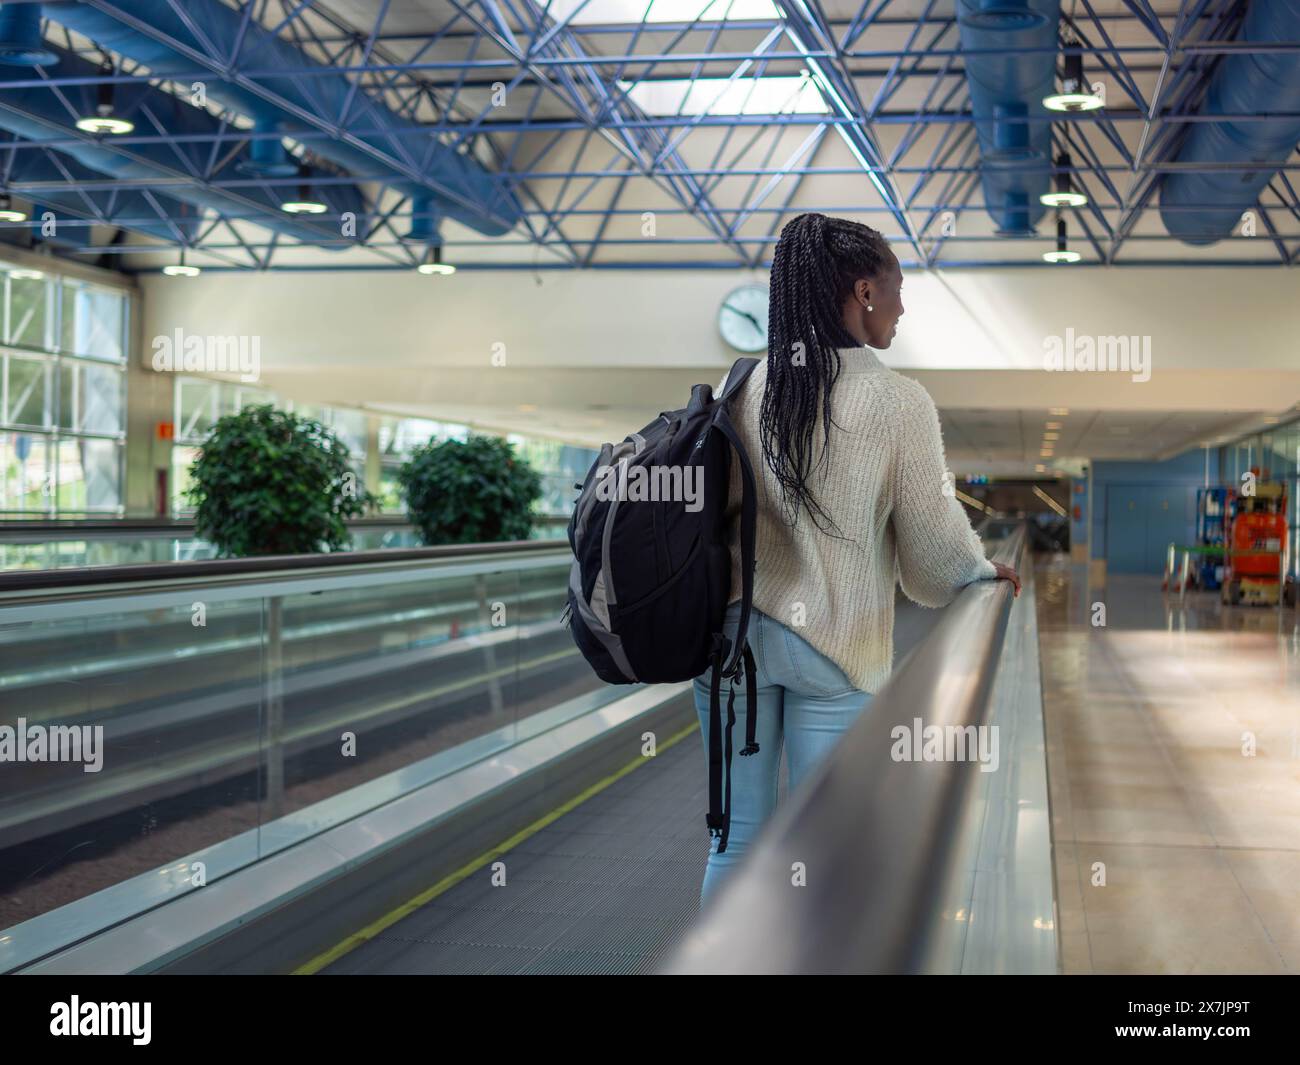 A young woman on a moving walkway inside an airport using her phone Stock Photo